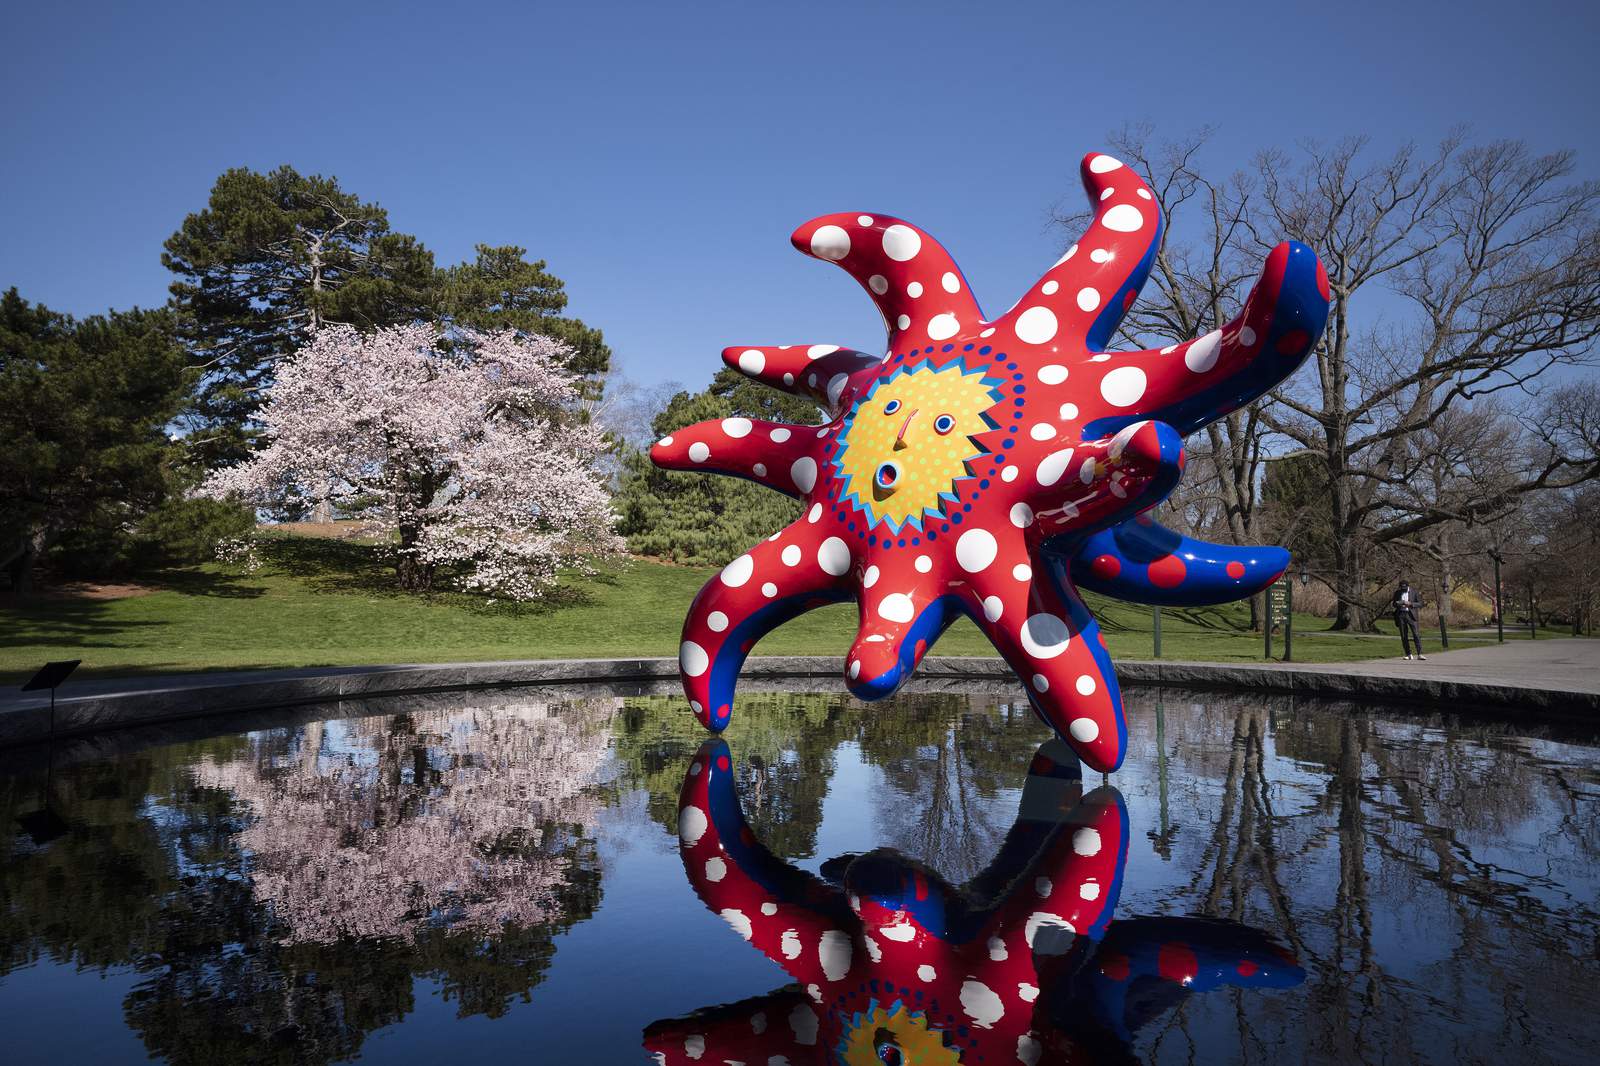 Artist gives nature a `cosmic' twist in big NY garden show